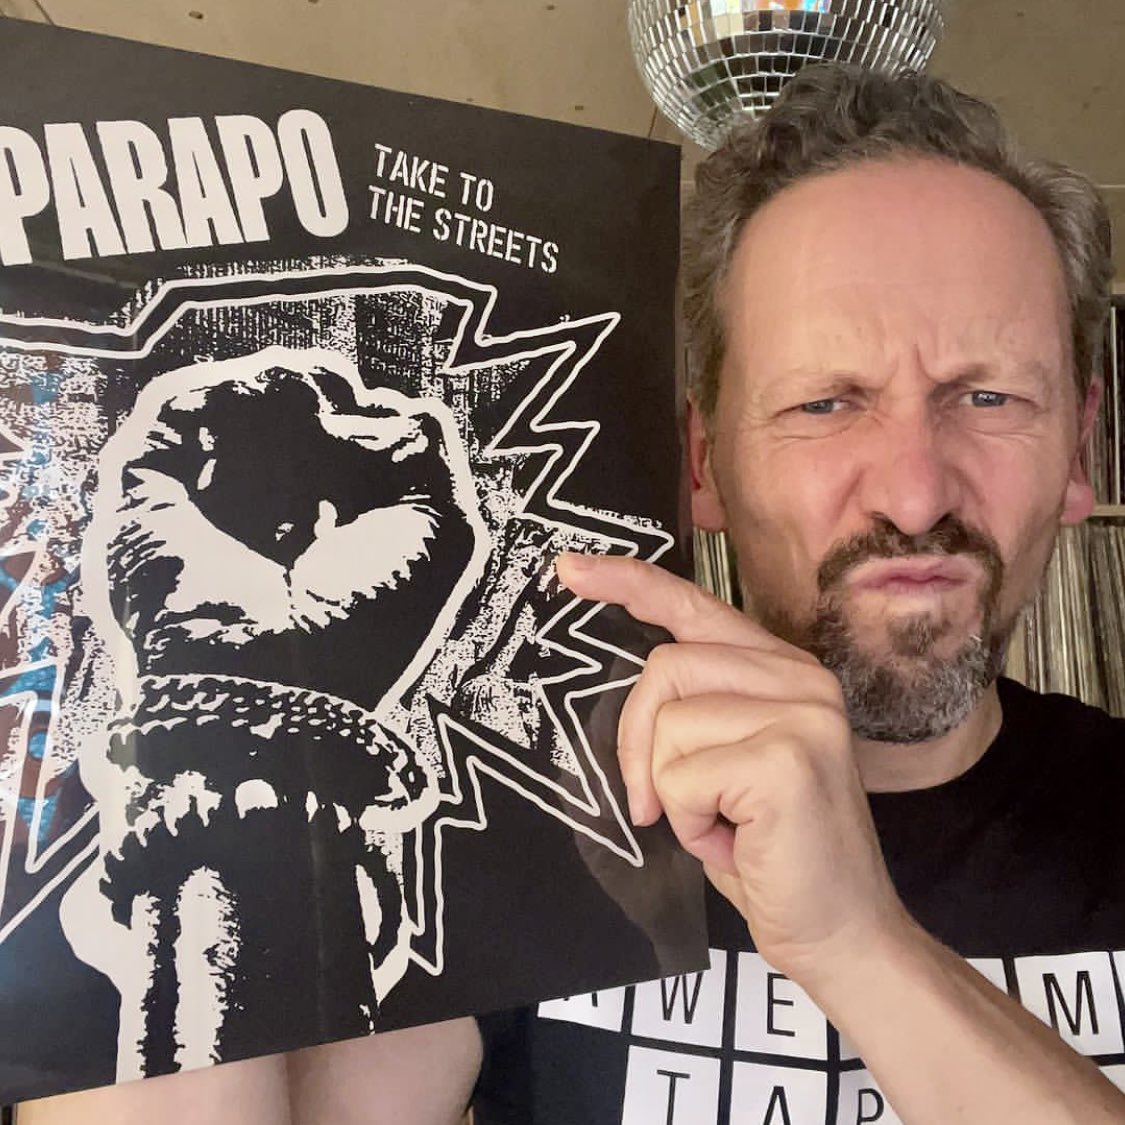 Pre-order @EparapoMusic album Take To The Streets (eparapo.bandcamp.com/album/take-to-…) & get the track Follow The Money feat @DeleSosimi straight away. As you can see, @wahwah45s label manager @DomServini is as hyped about it as I am! 🔥
#newalbum #afrobeat #newmusic #instantgratification